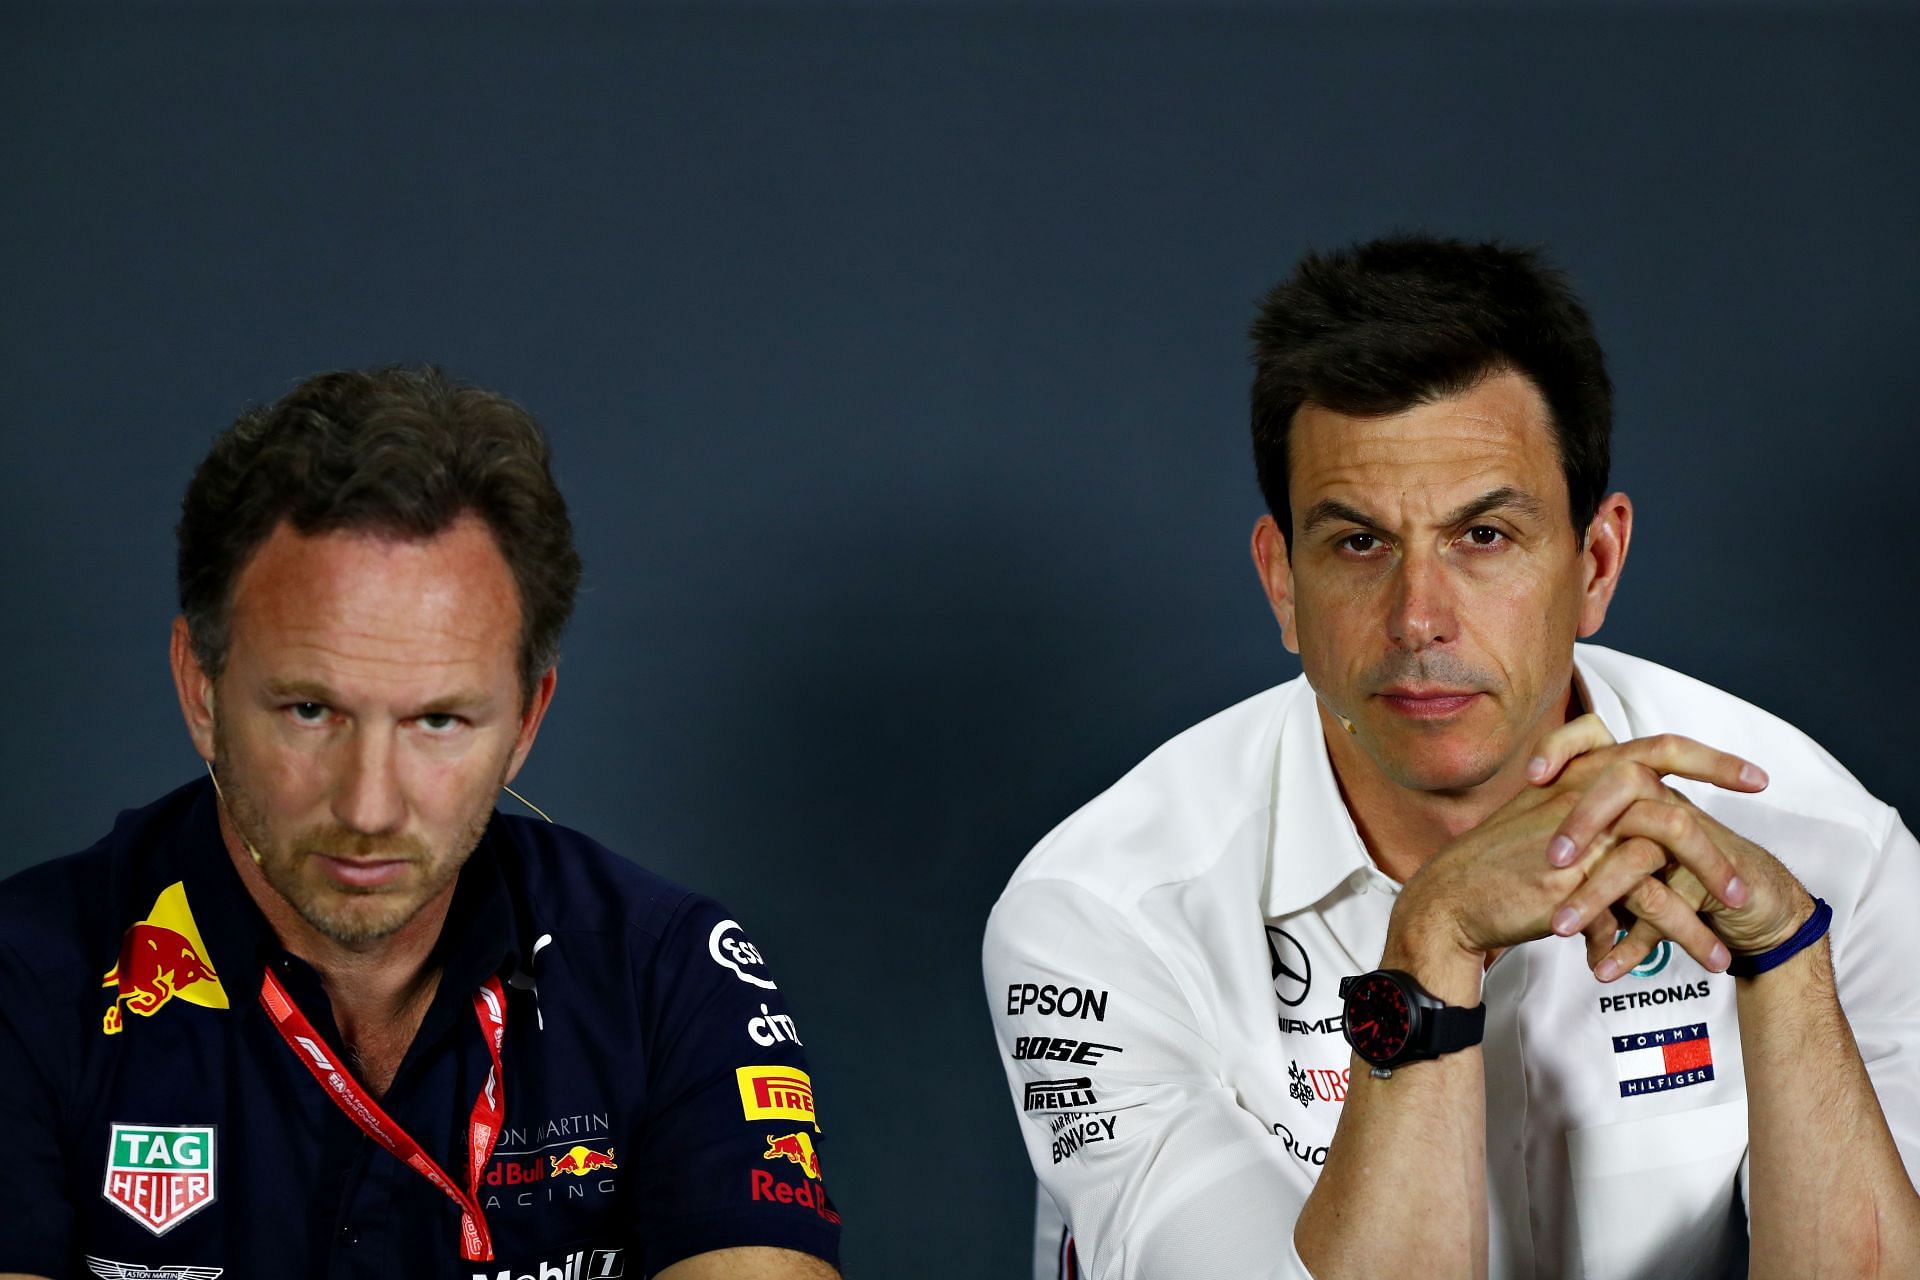 Christian Horner (left) and Toto Wolff (right) made &quot;peace&quot; at the Qatar Grand Prix ahead of the 2021 season finale